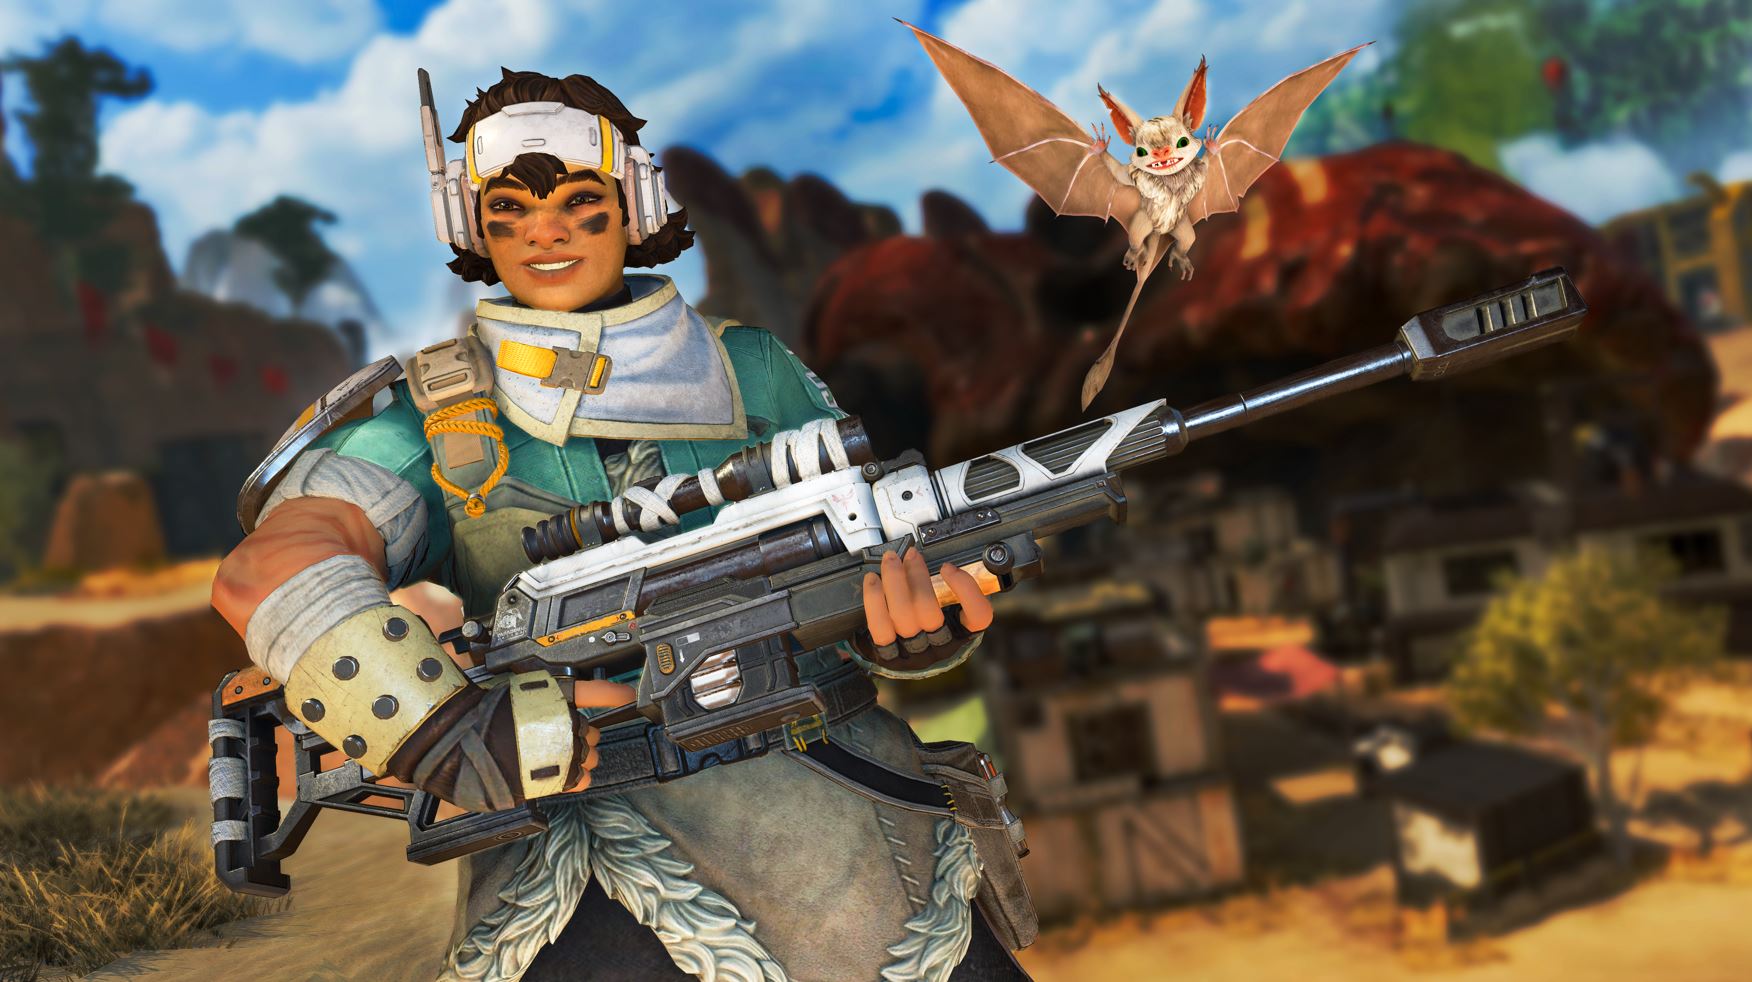 Apex Legends’ newest character is a deadly sniper with an adorable bat pal, Gift Card Maverick, giftcardmaverick.com